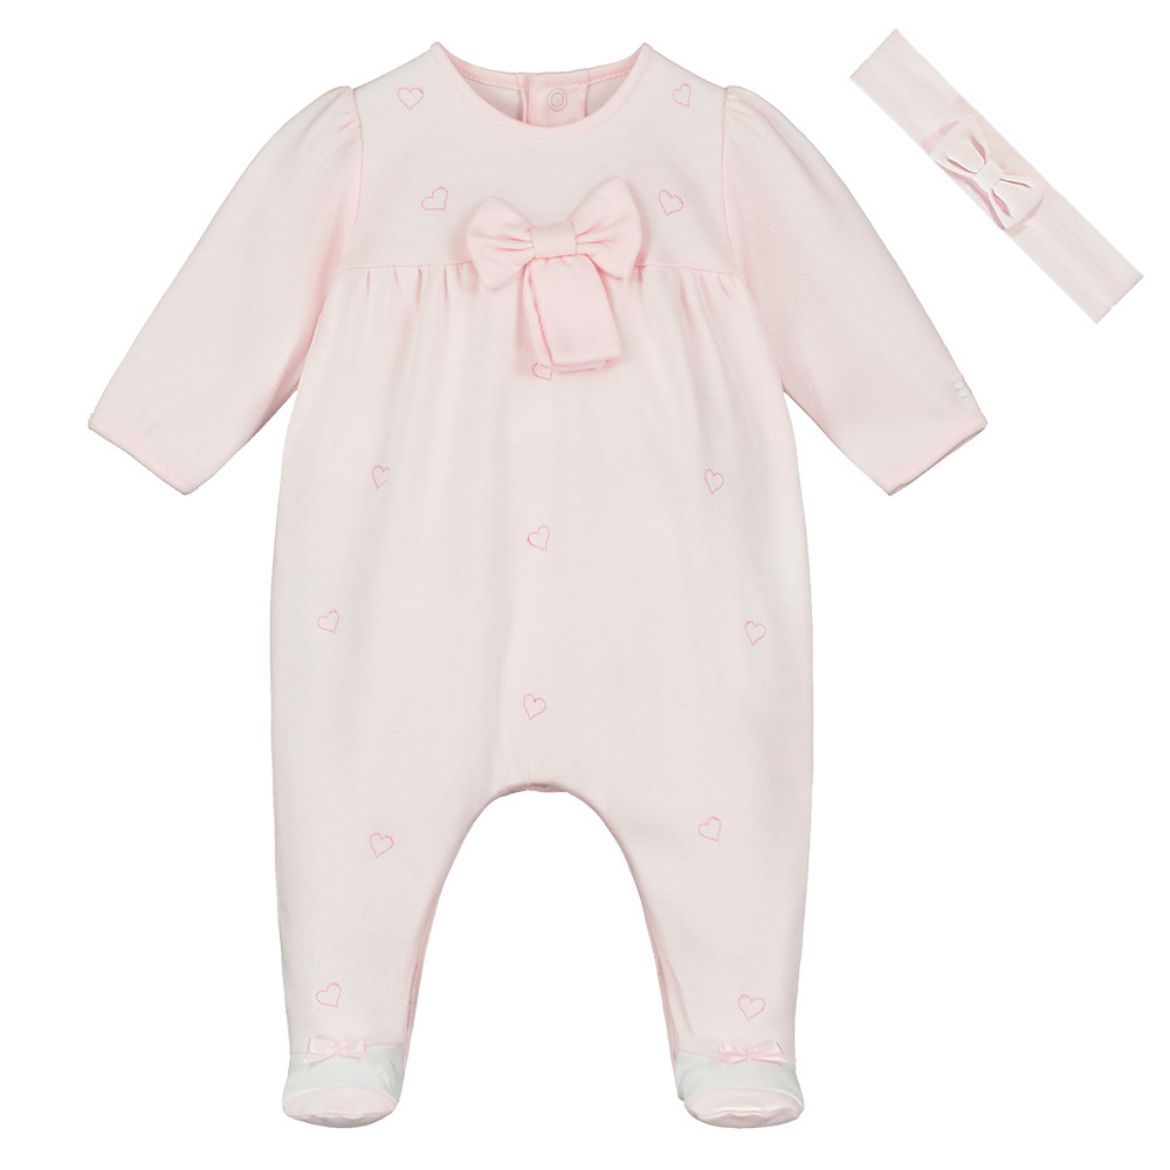 Picture of Emile Et Rose Girls 'Flavia' Pink Baby Grow